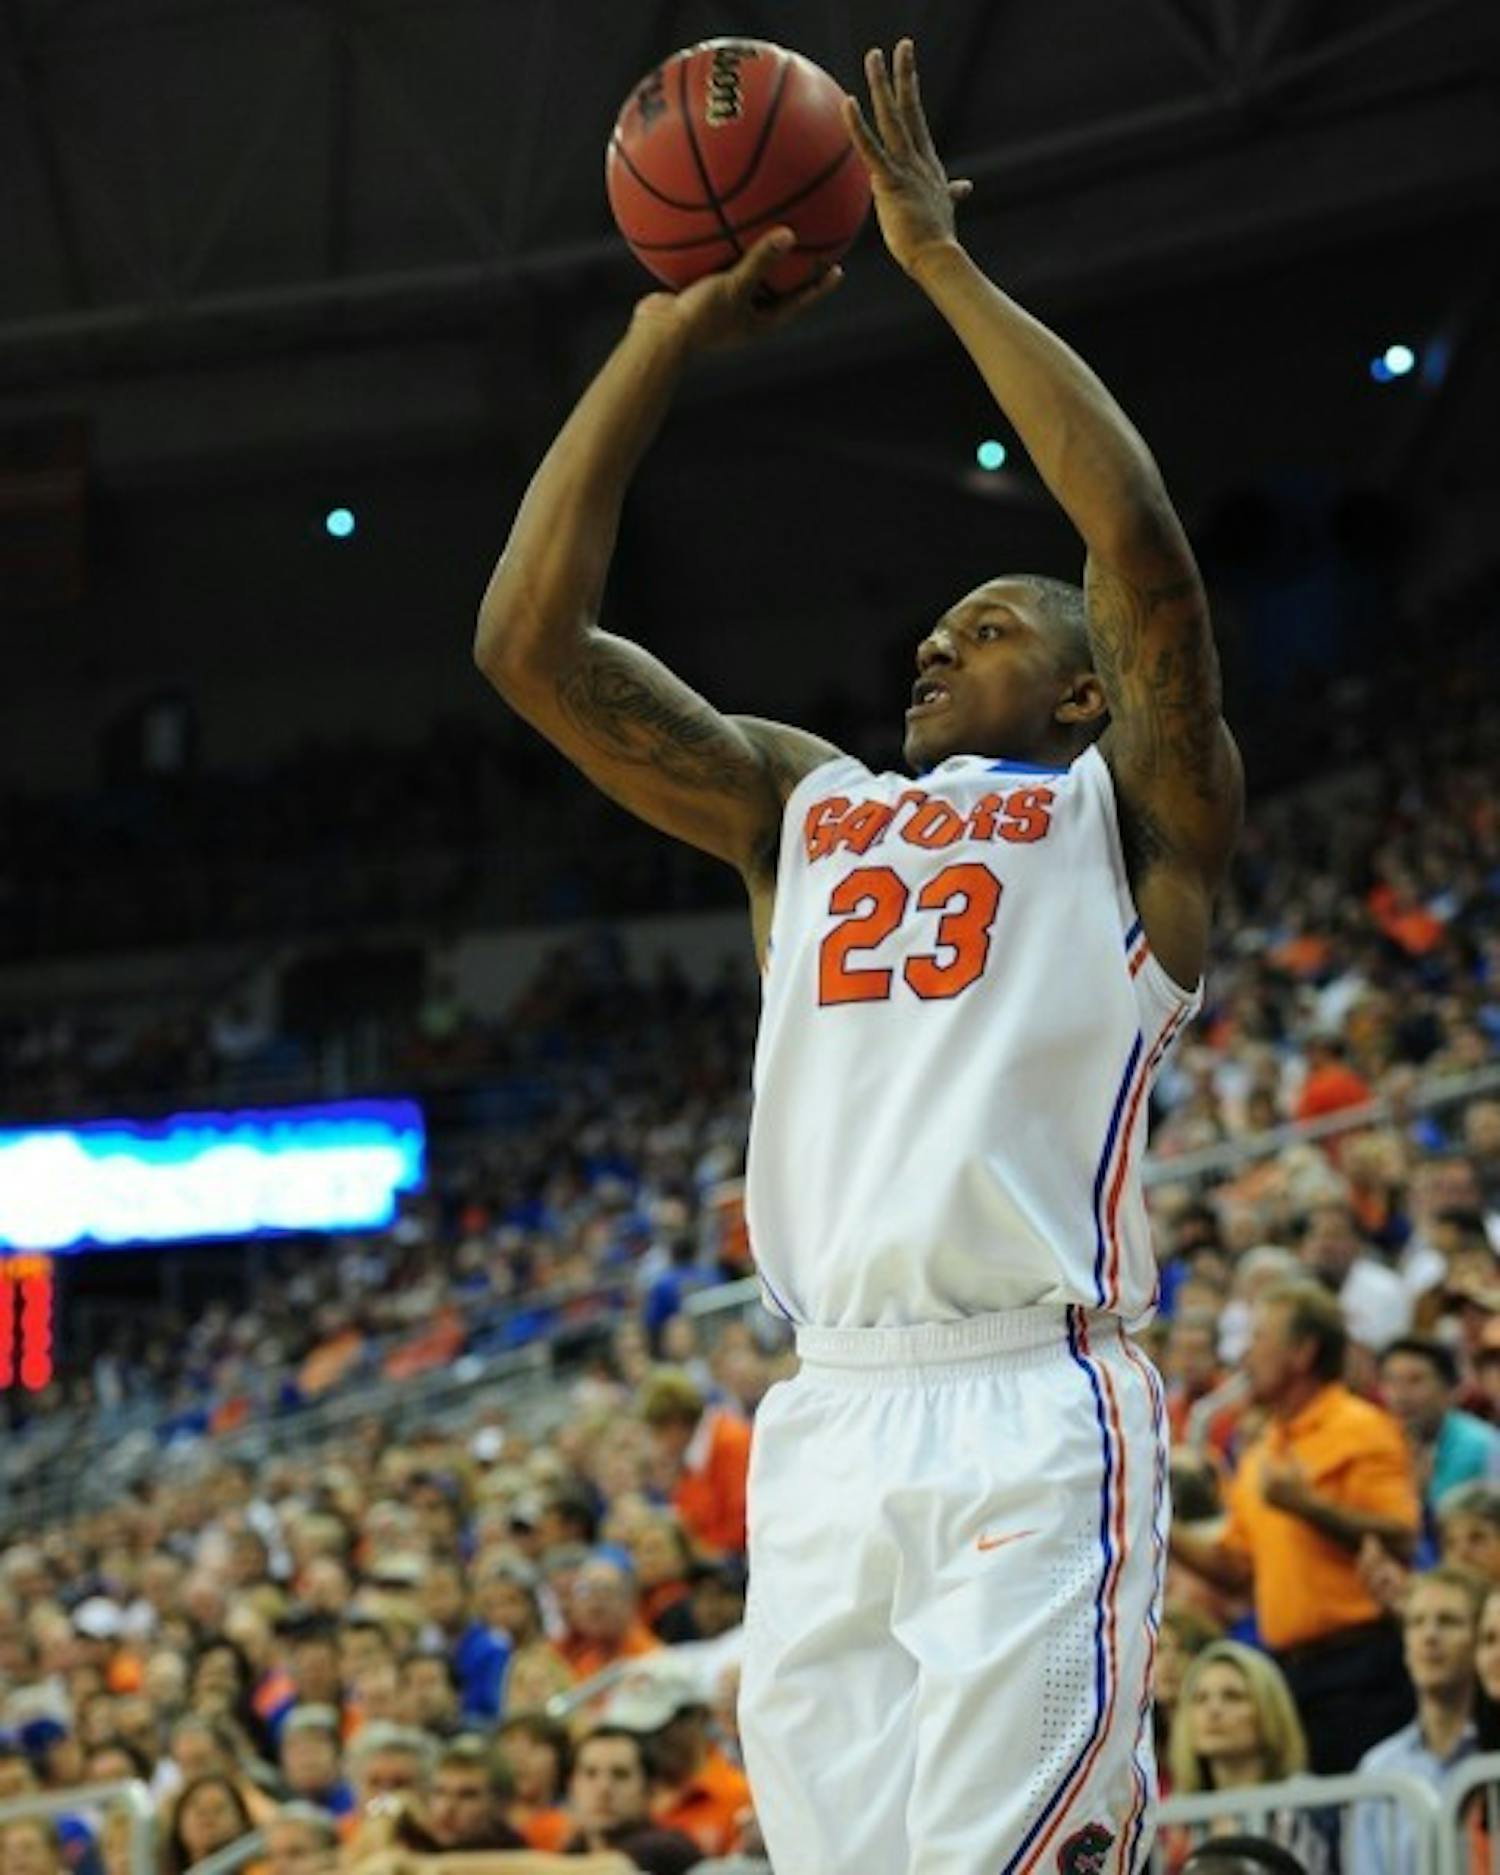 Freshman guard Brad Beal scored a game-high 21 points and added six rebounds in the Gators' 82-64 win against the Seminoles on Thursday at the O'Connell Center.